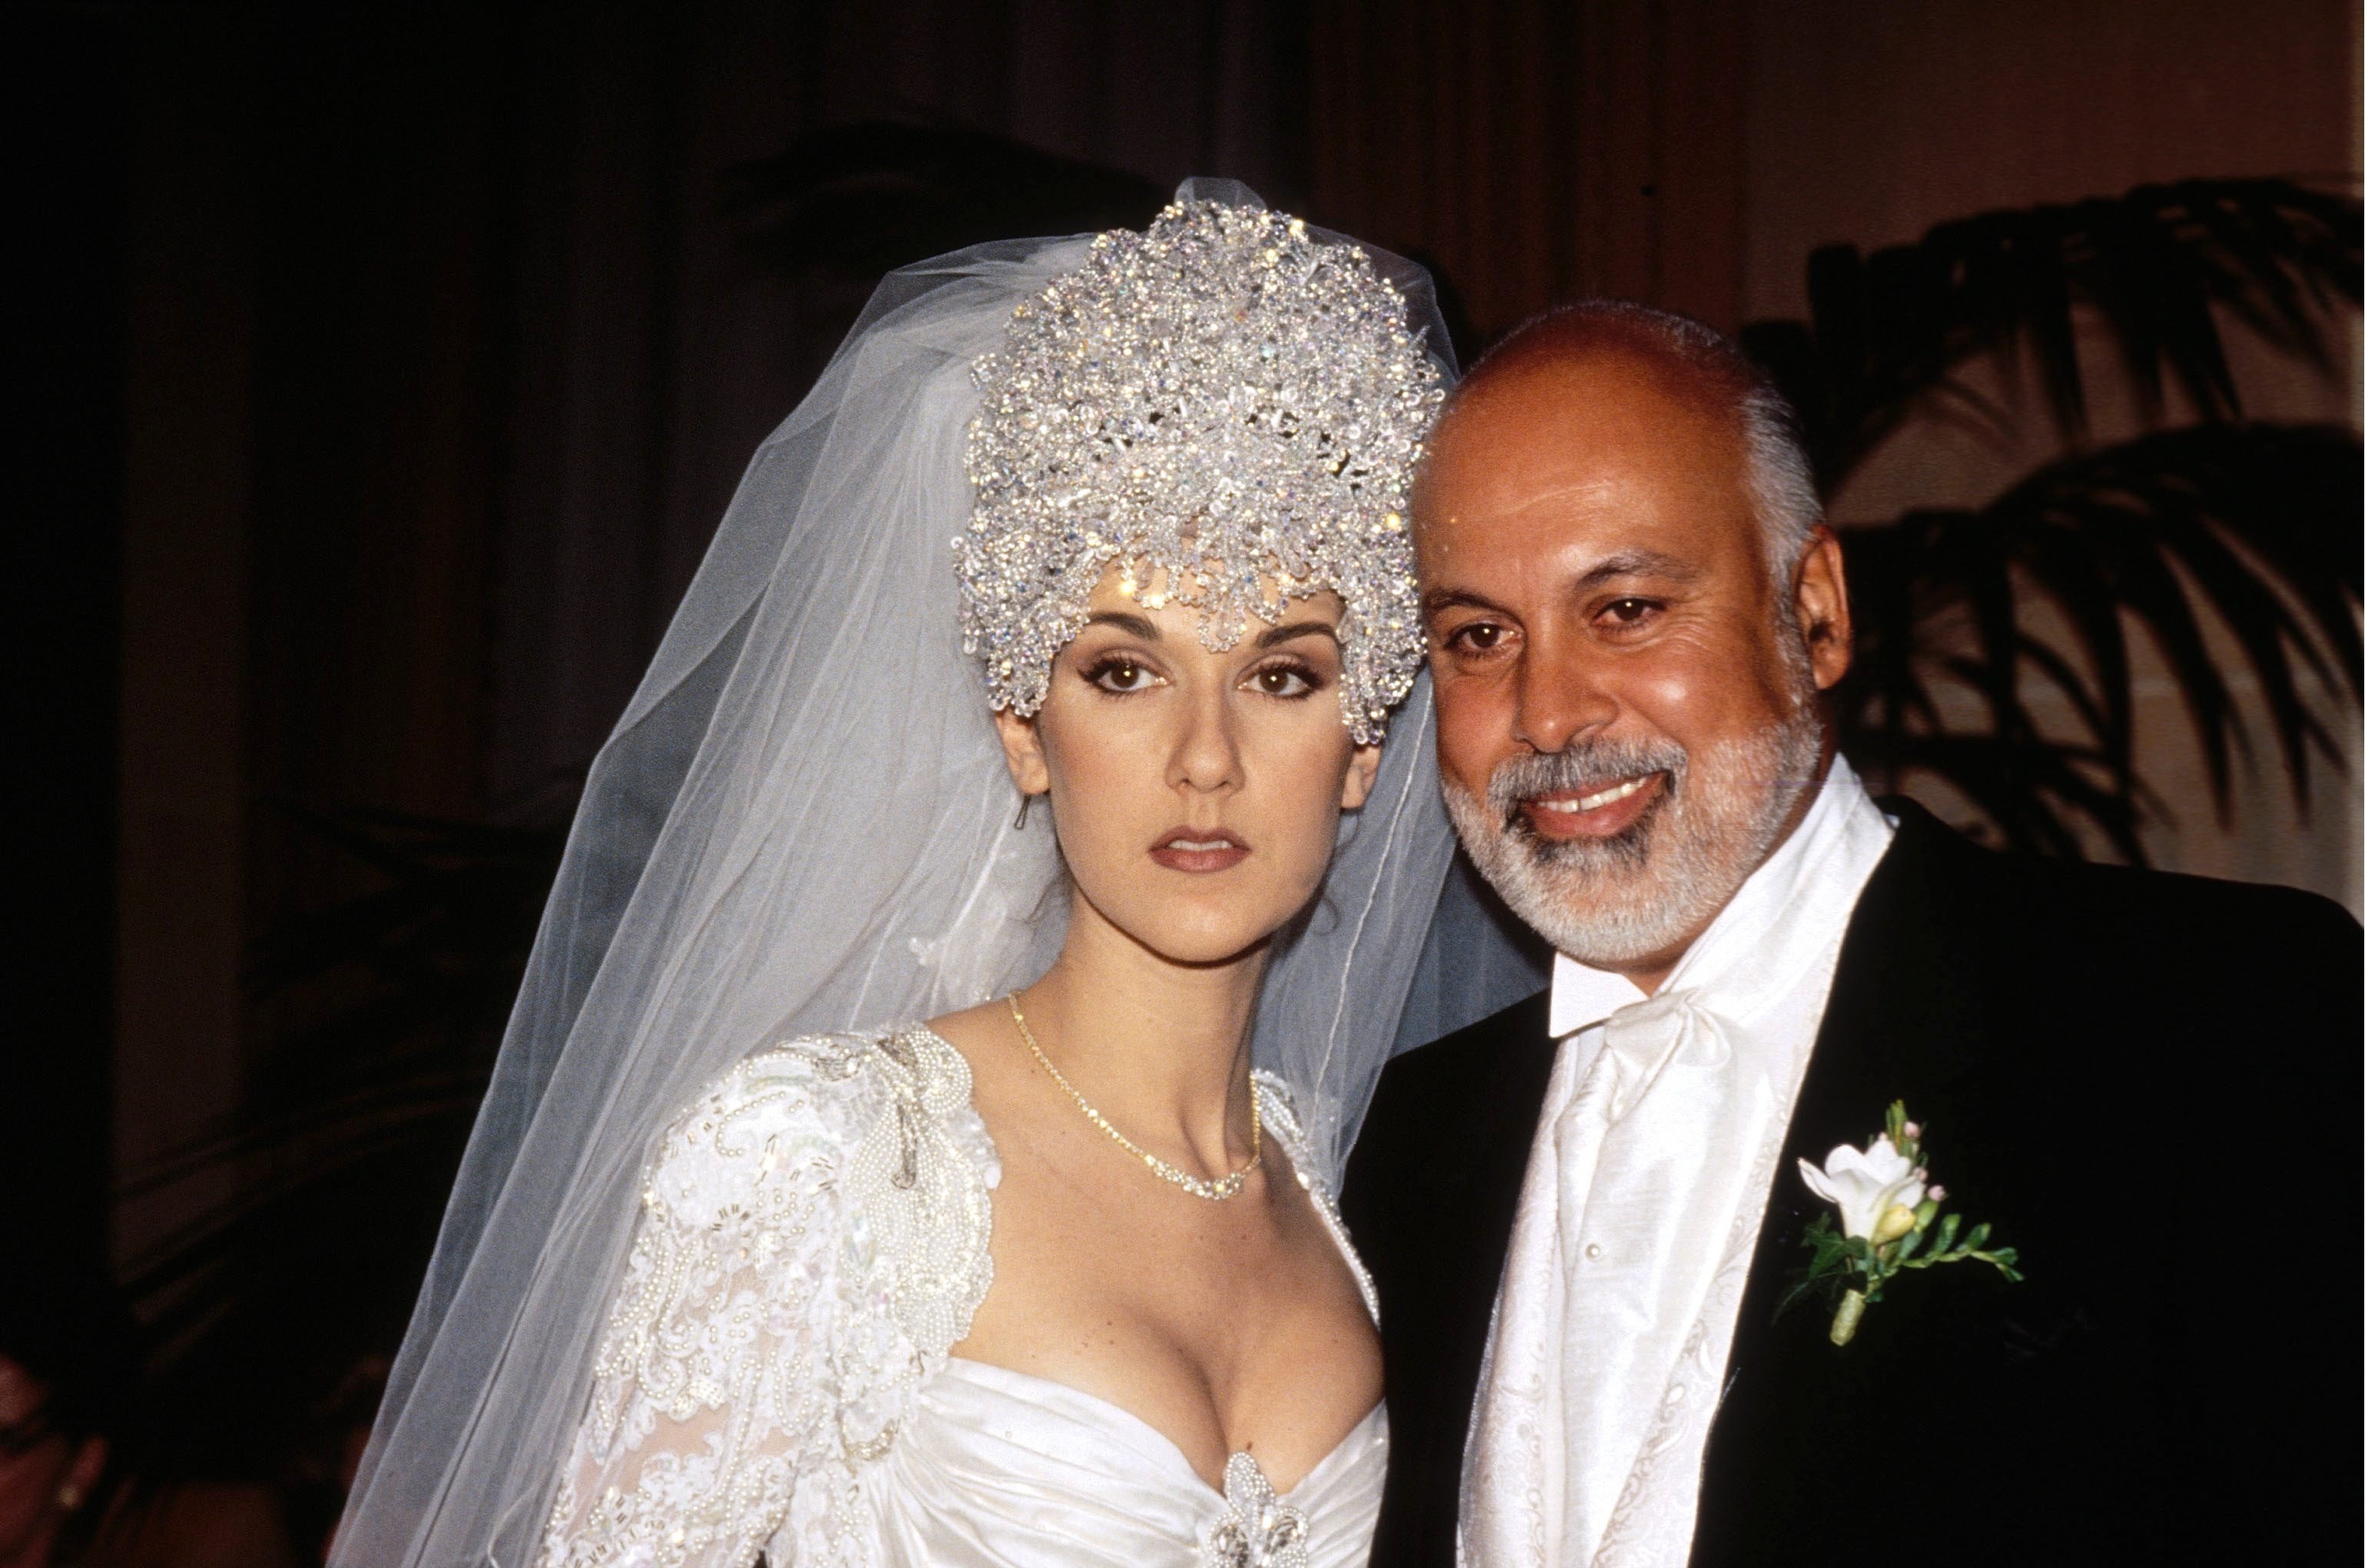 Celine Dion with Rene AngelilIn Montreal, Canada In May, 1996-December, 17, 1994, during their wedding | Source: Getty Images